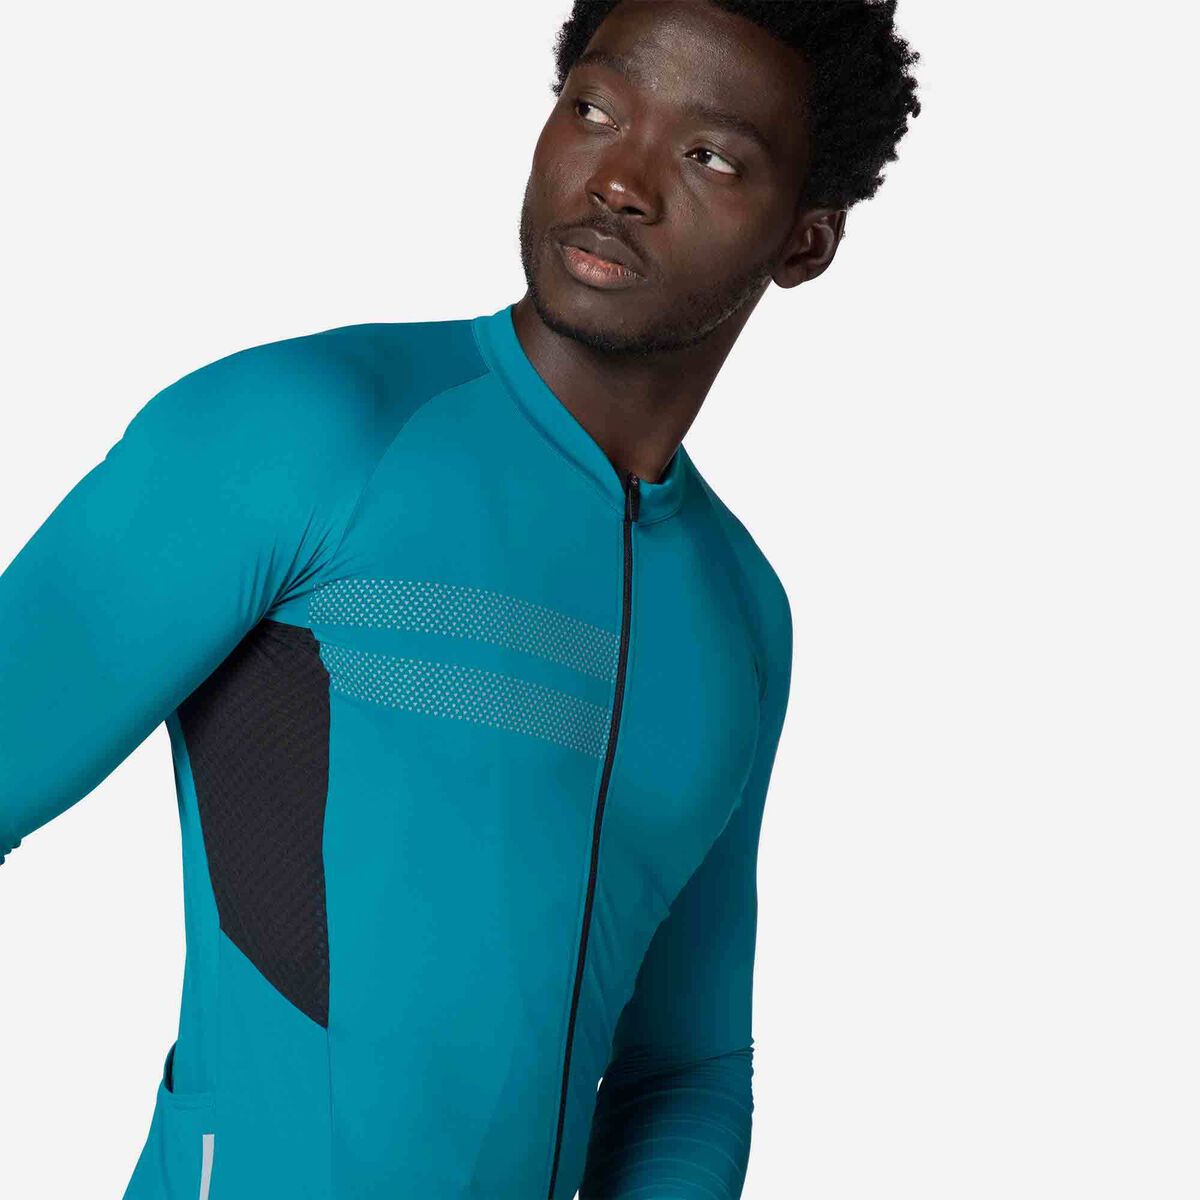 Men's Cycling Jersey, storefront catalog ca